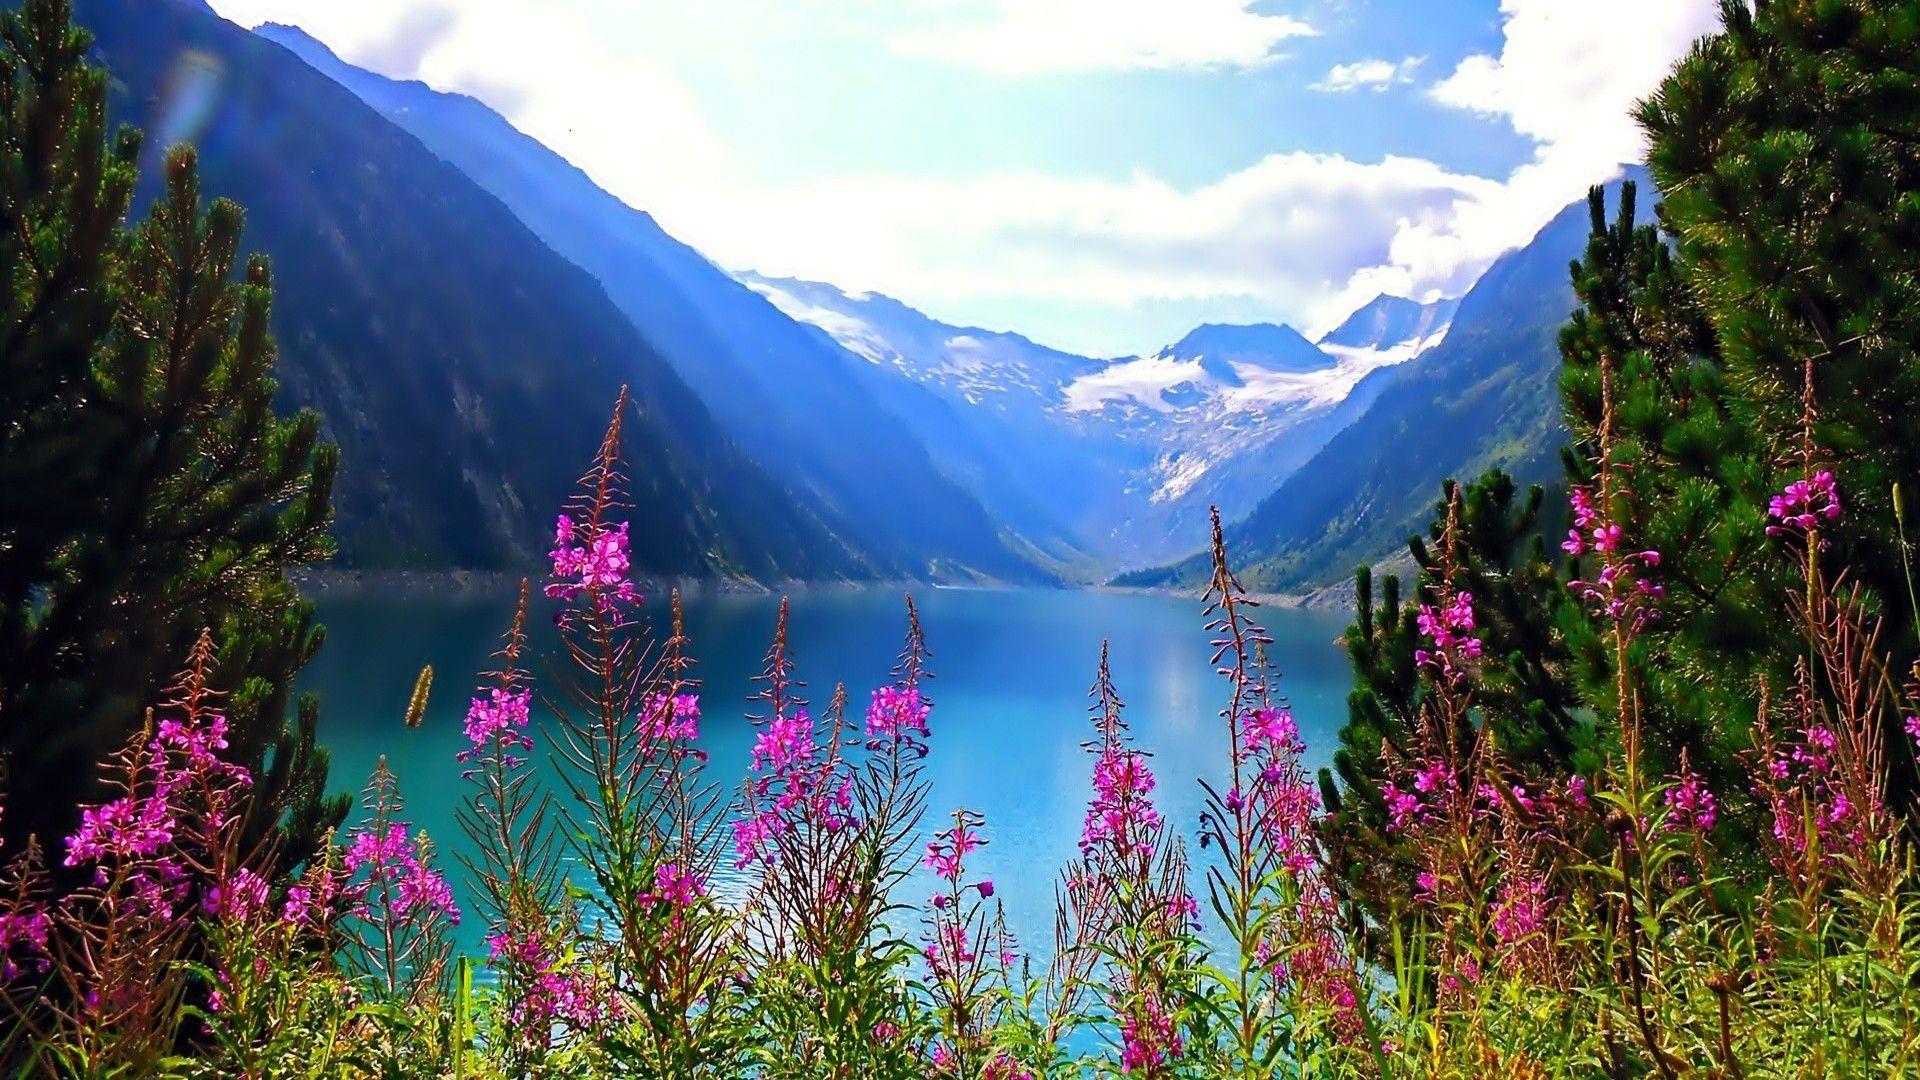 Landscape With Mountain, Lake And Flowers Wallpapers - Wallpaper Cave